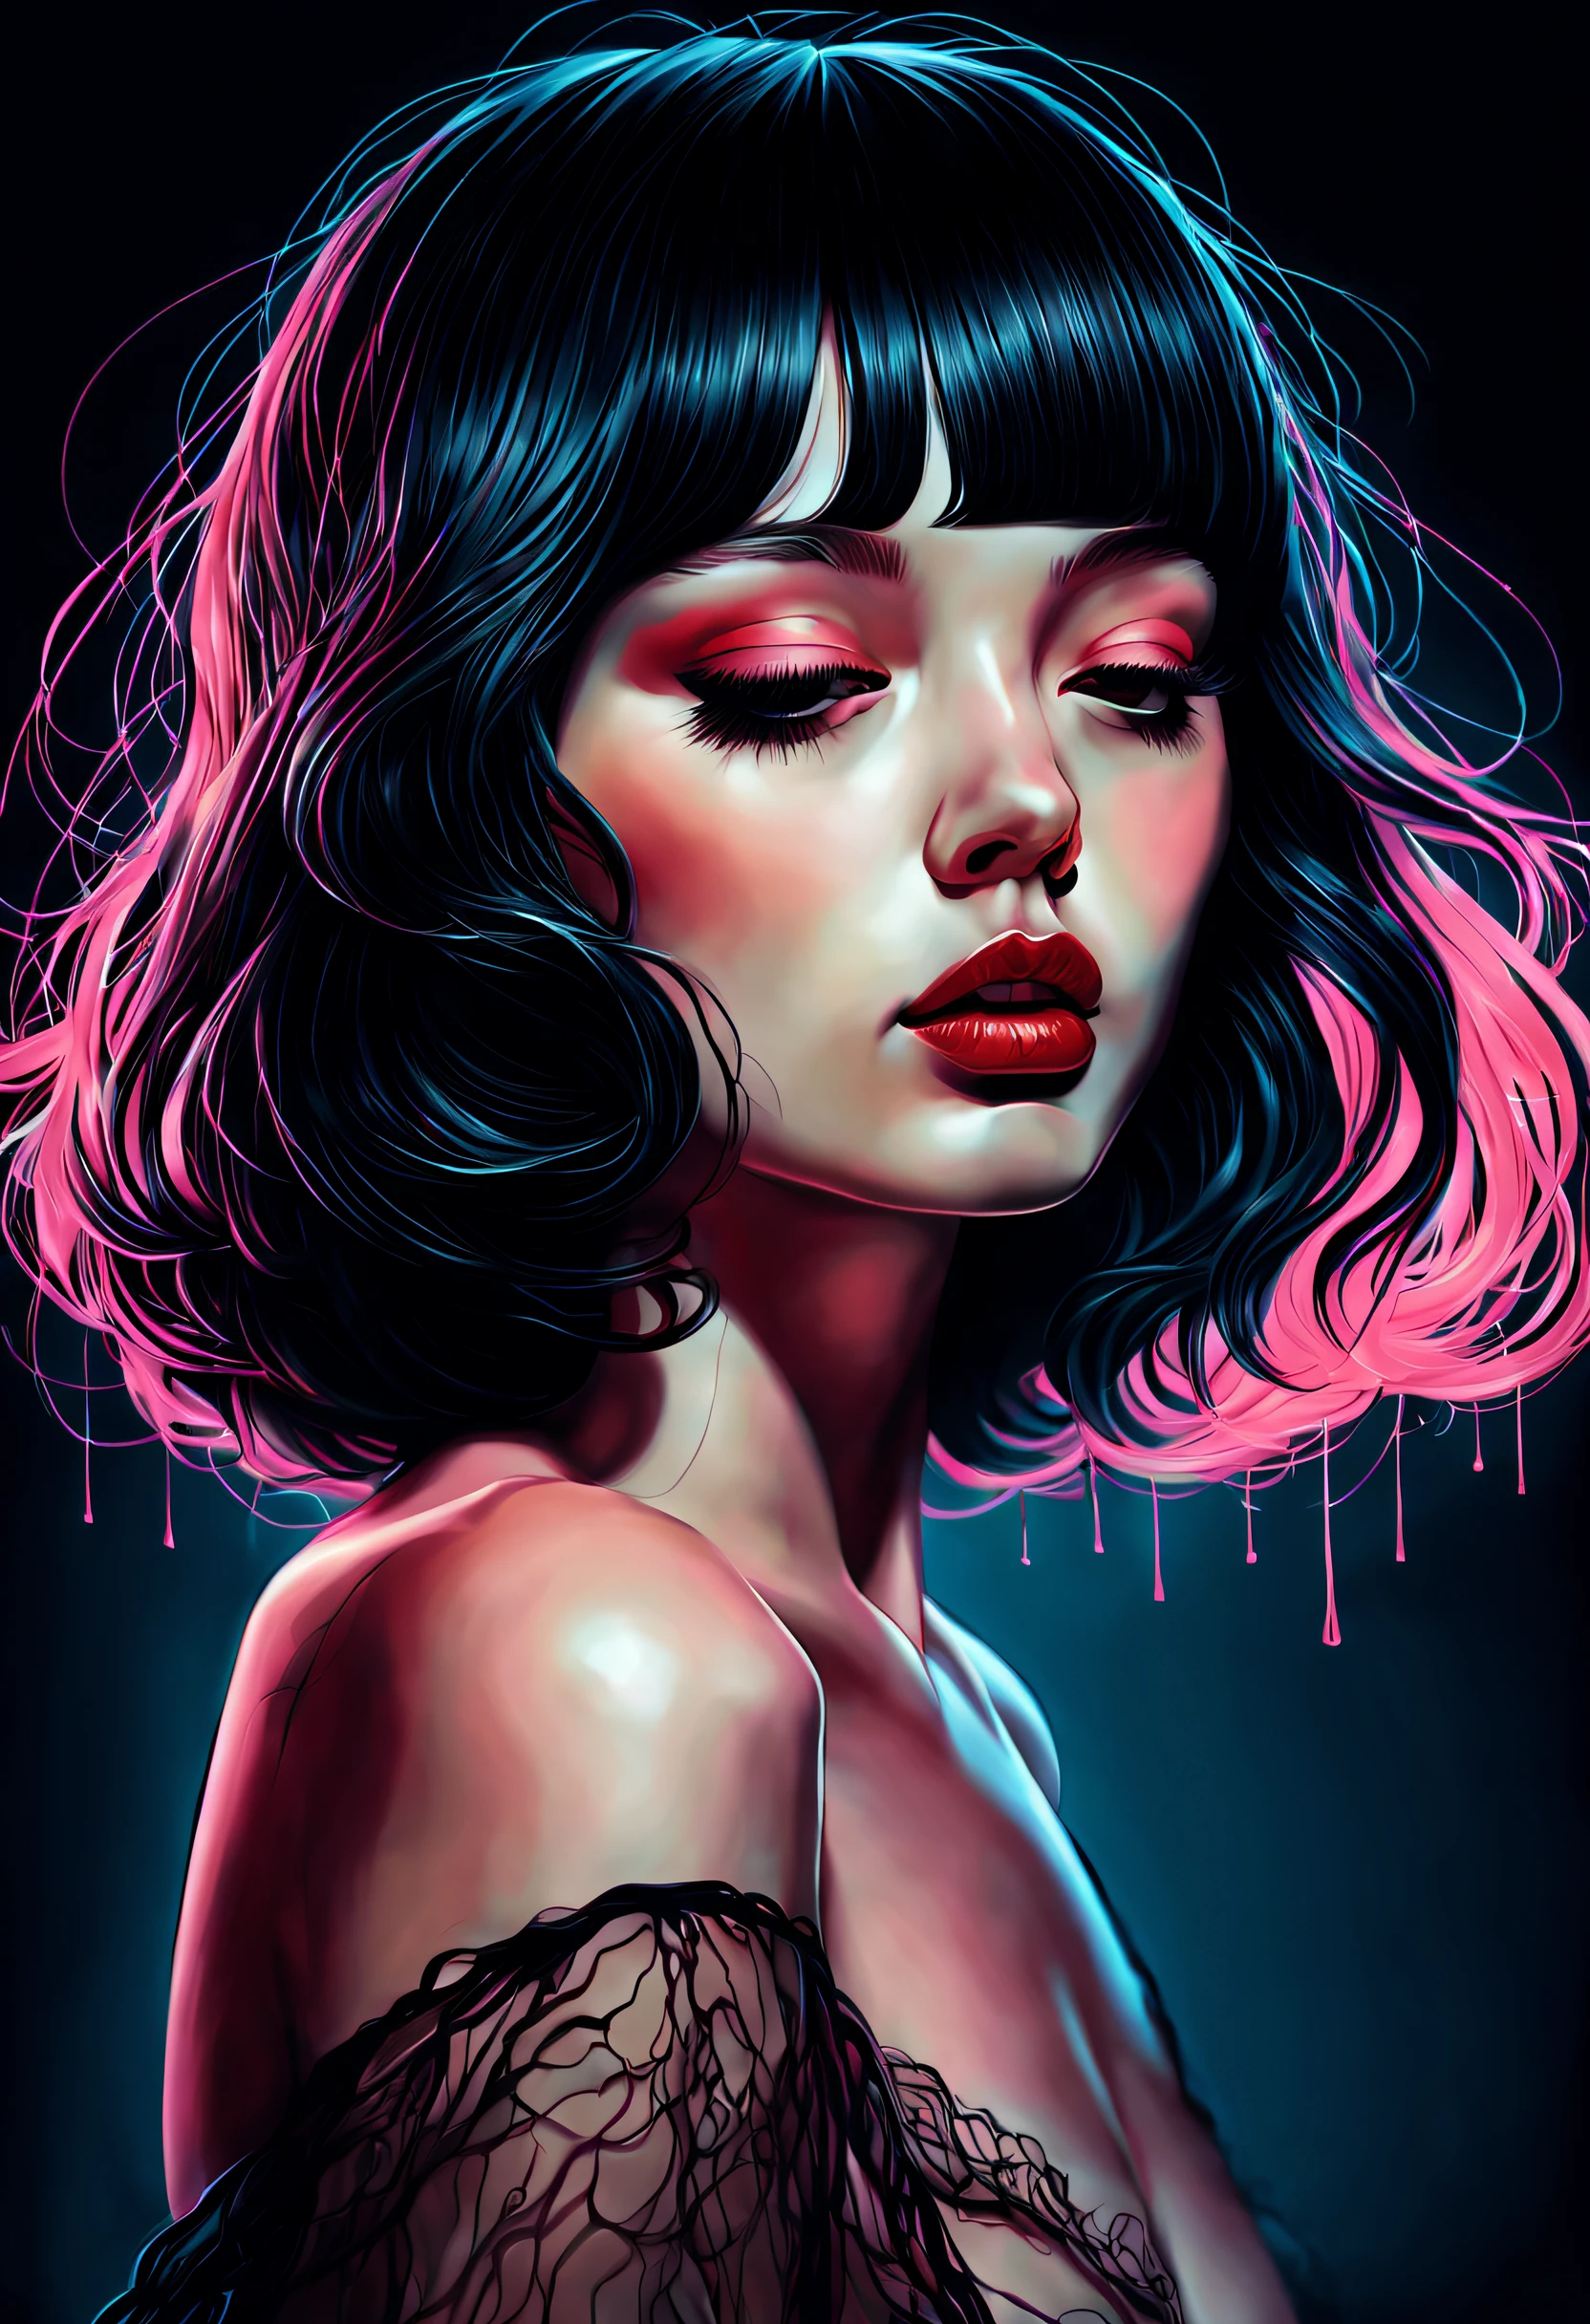 chiaroscuro technique on sensual illustration of an elegant girl,  wet hair, vintage, eerie, matte painting, by Hannah Dale, by Harumi Hironaka, extremely soft colors, vibrant, highly detailed, digital illustrations , high contrast, dramatic, refined, tonal, facial expression